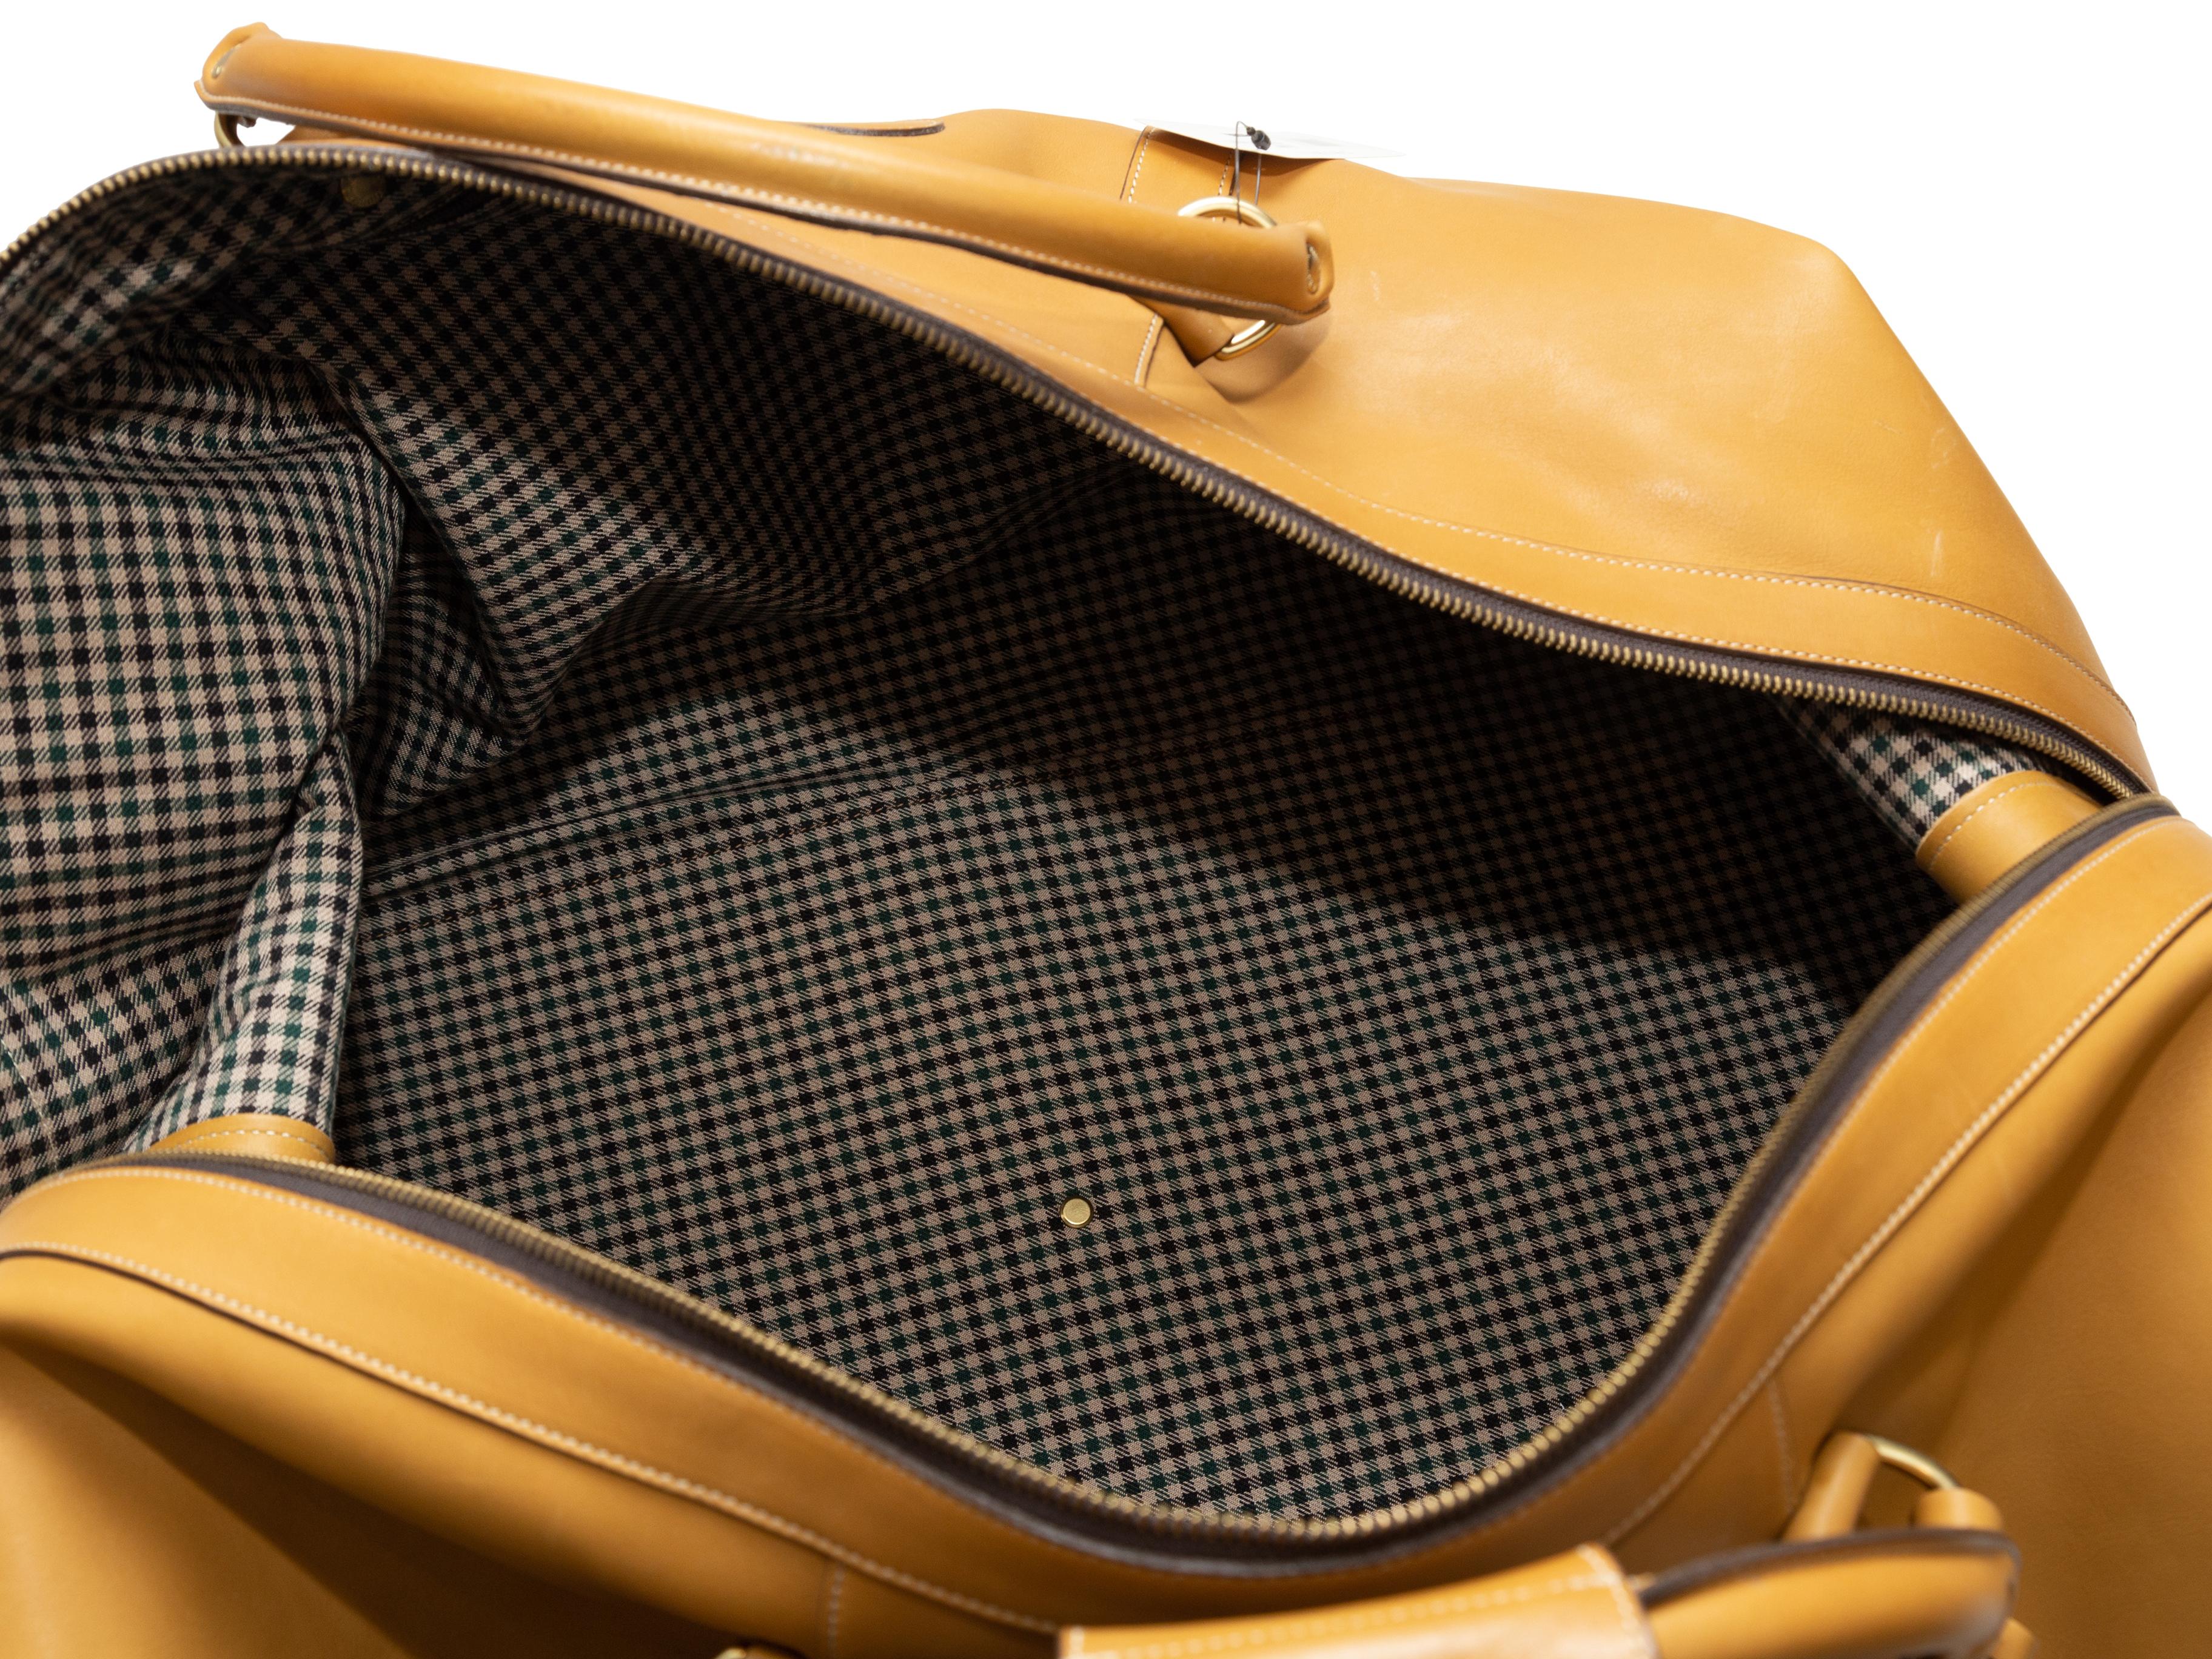 Product details: Wheat leather No. 98 Cavalier Duffel Bag by Ghurka. Gold-tone hardware. Dual rolled top handles. Optional shoulder strap. Zip closure at top. 33